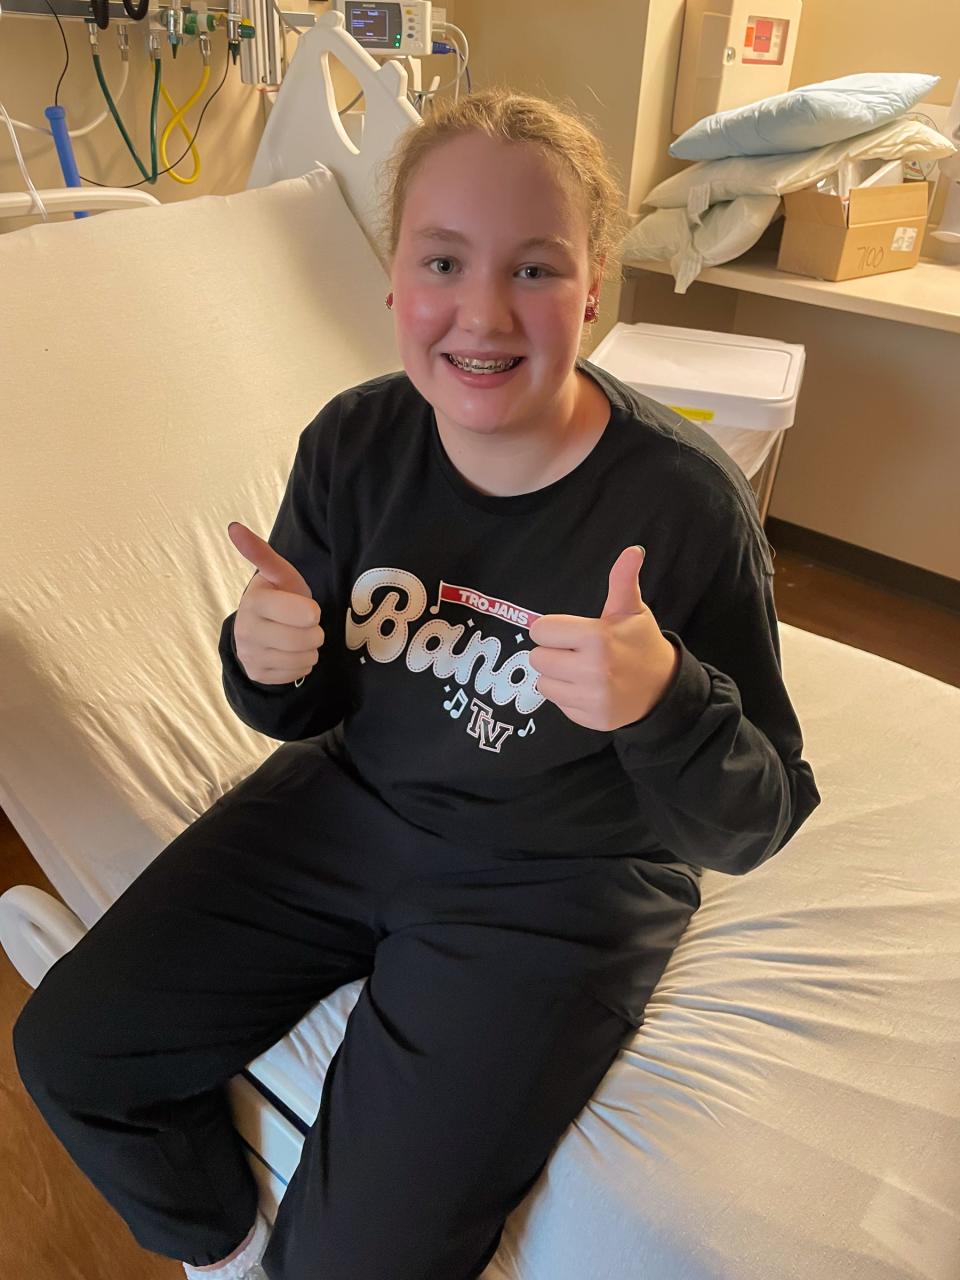 Brynn Goedel was released from the hospital on Dec. 27 after undergoing four surgeries.